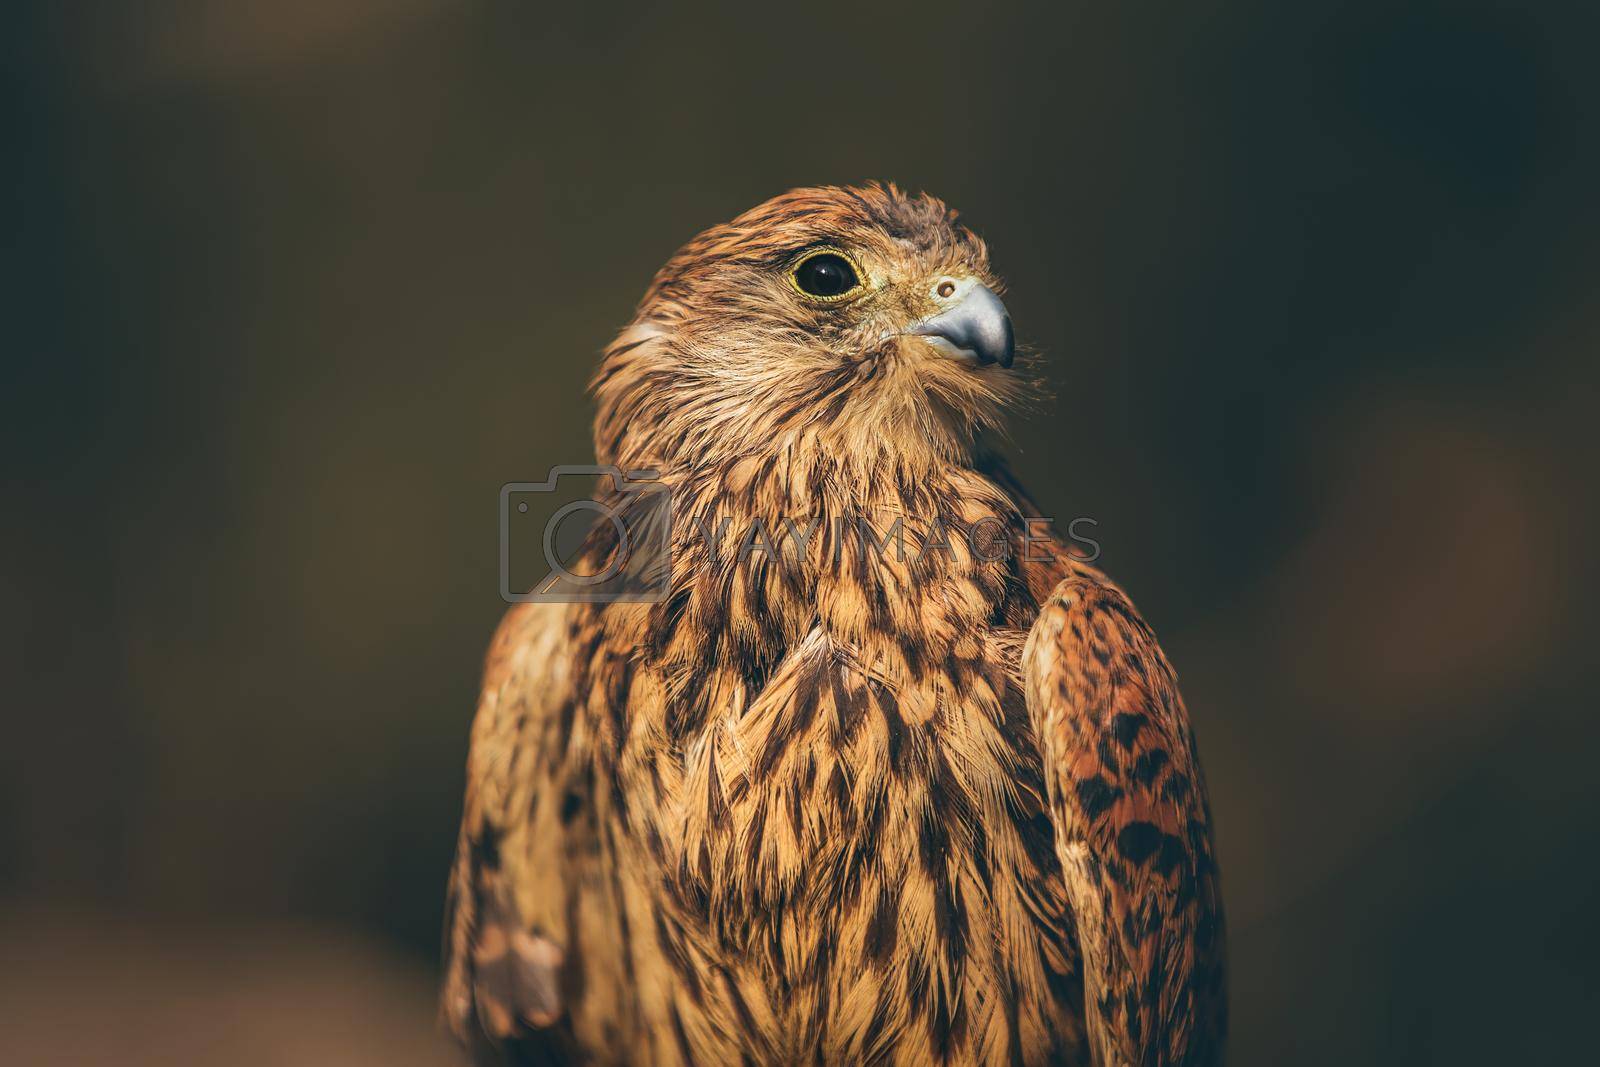 Royalty free image of Beautiful Eagle Portrait by Anna_Omelchenko